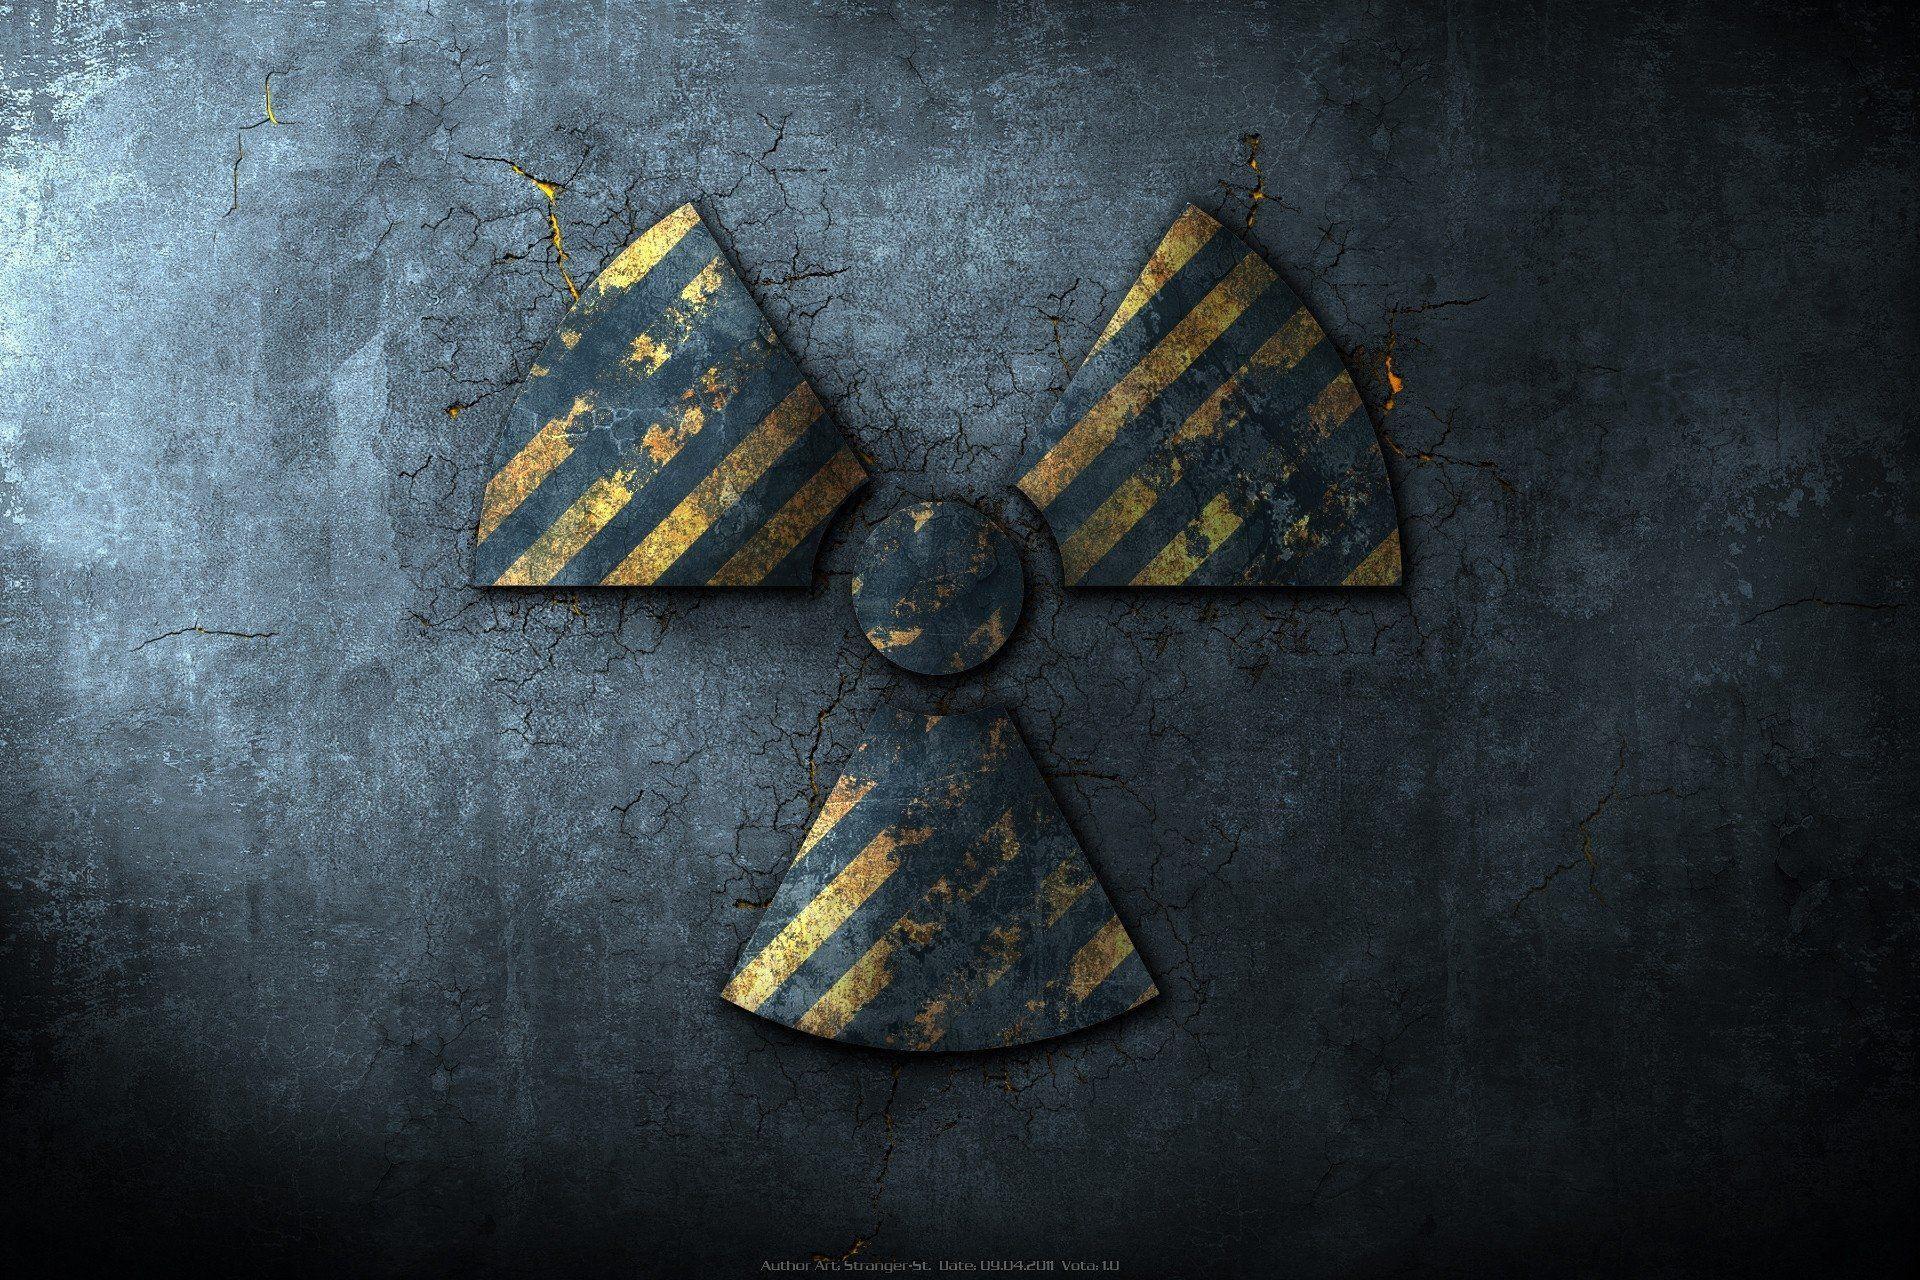 Radiation Wallpapers - Wallpaper Cave